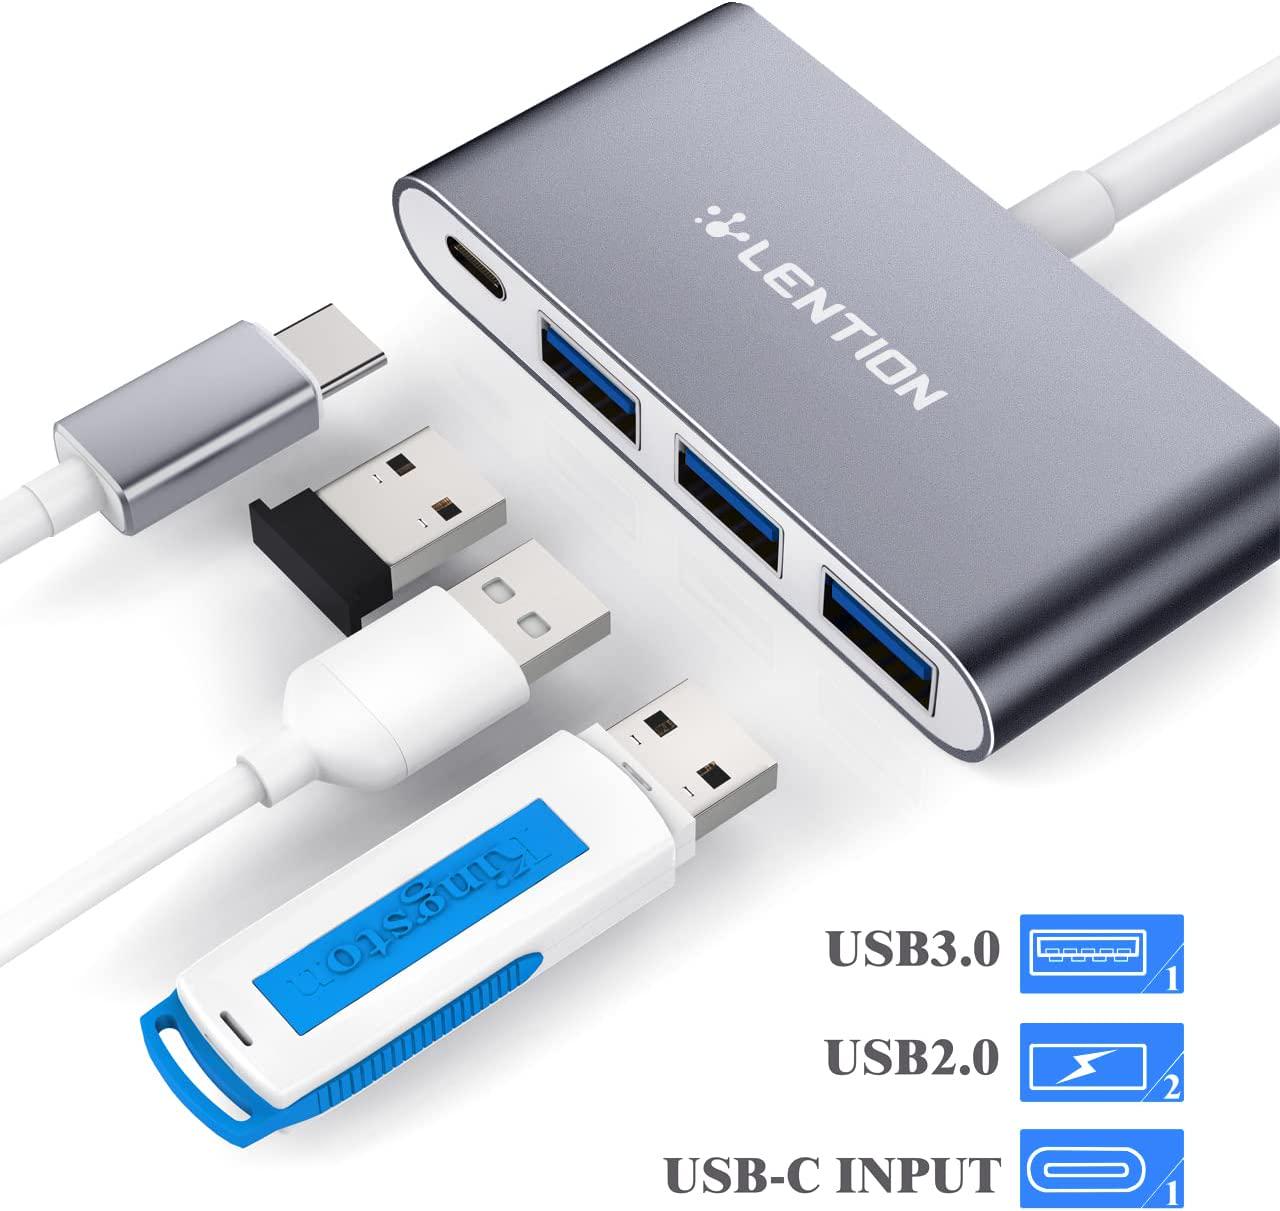 LENTION, LENTION 4-in-1 USB-C Hub with 3 USB 3.0 and Type C Power Delivery Compatible 2022-2016 MacBook Pro 13/15/16, New Mac Air/Surface, ChromeBook, More, Multiport Charging Adapter (CB-C13se, Space Gray)